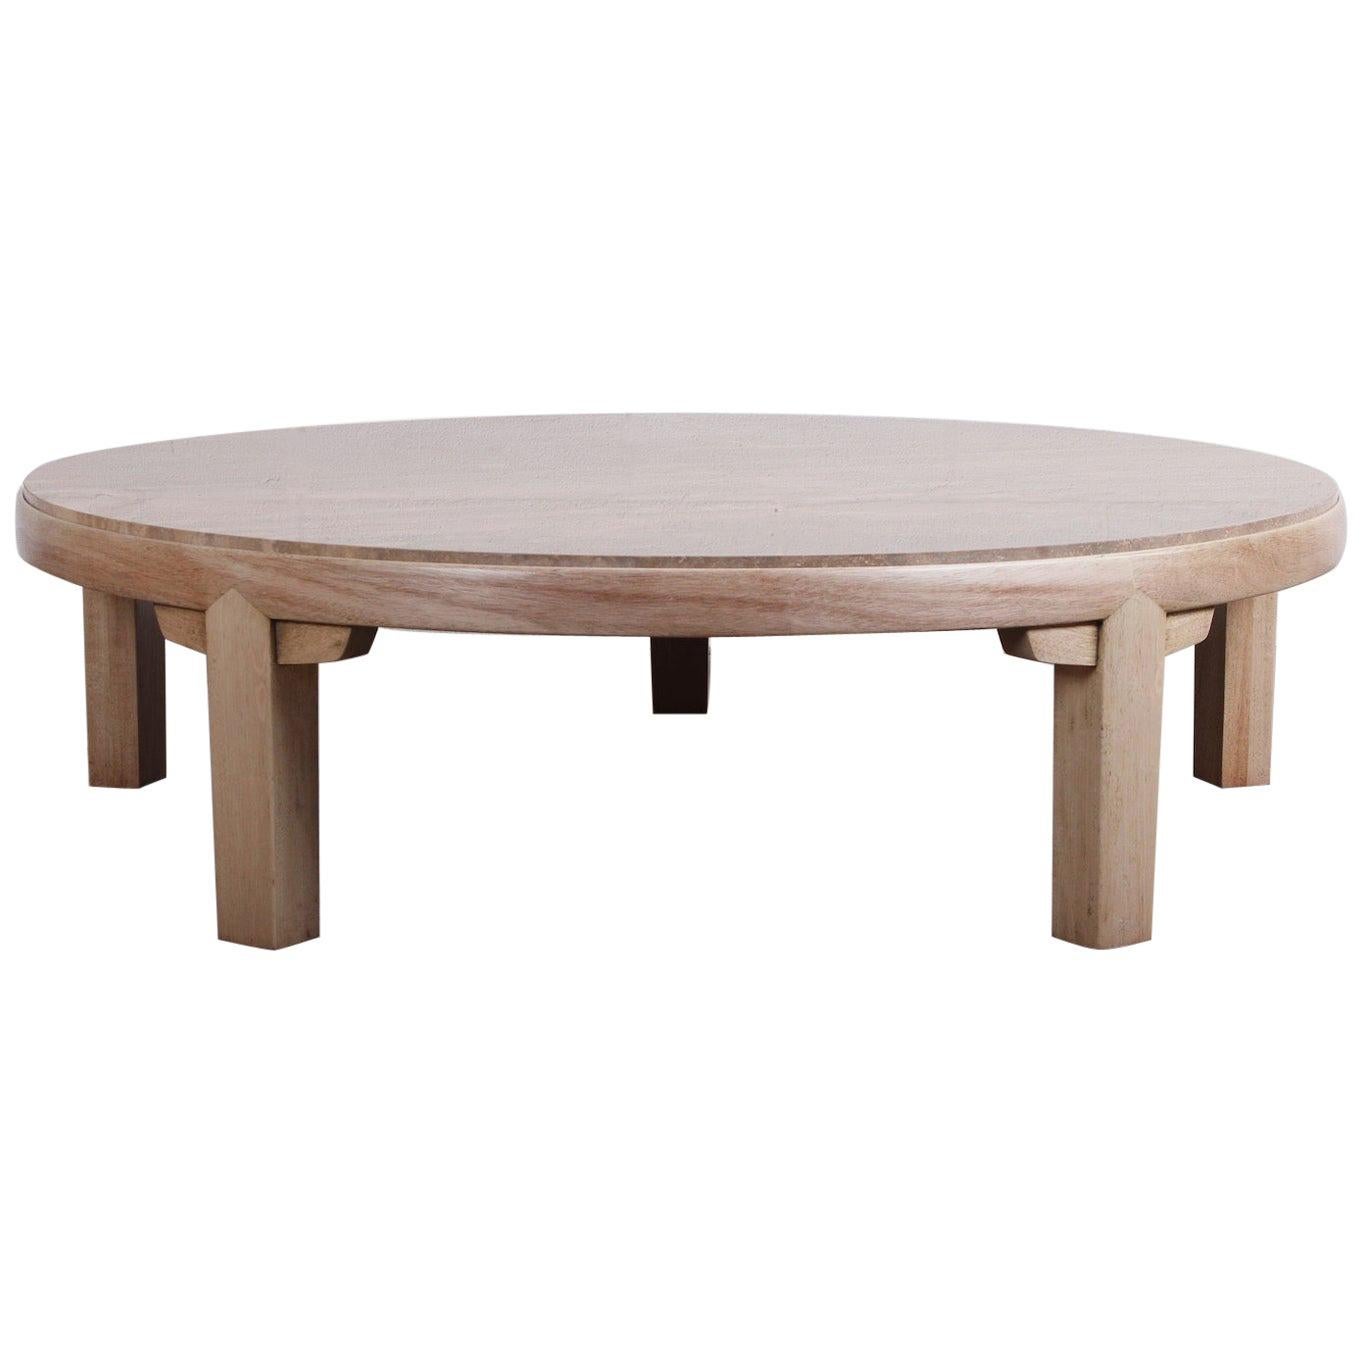 Travertine and Bleached Mahogany Coffee Table by Edward Wormley for Dunbar